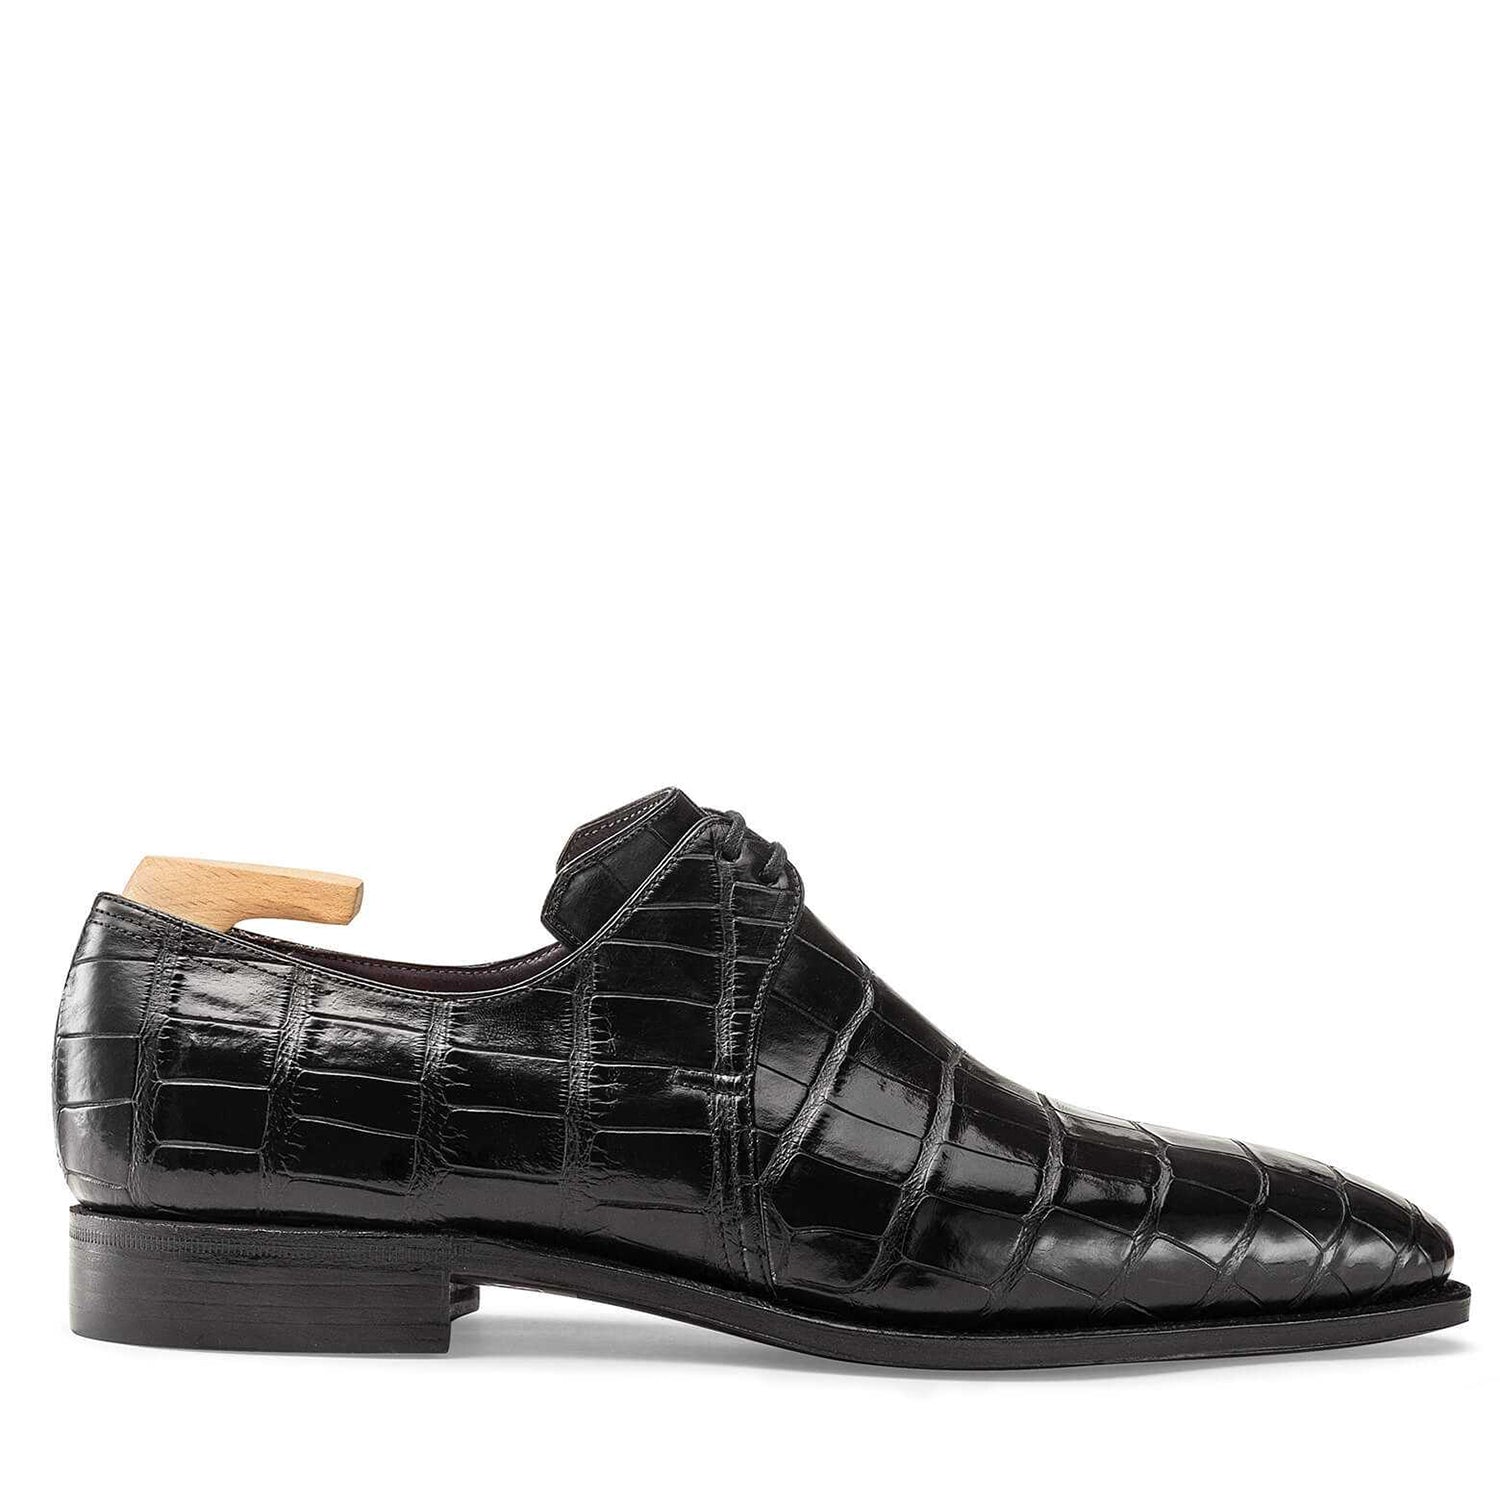 Croco Black Leather Shoes